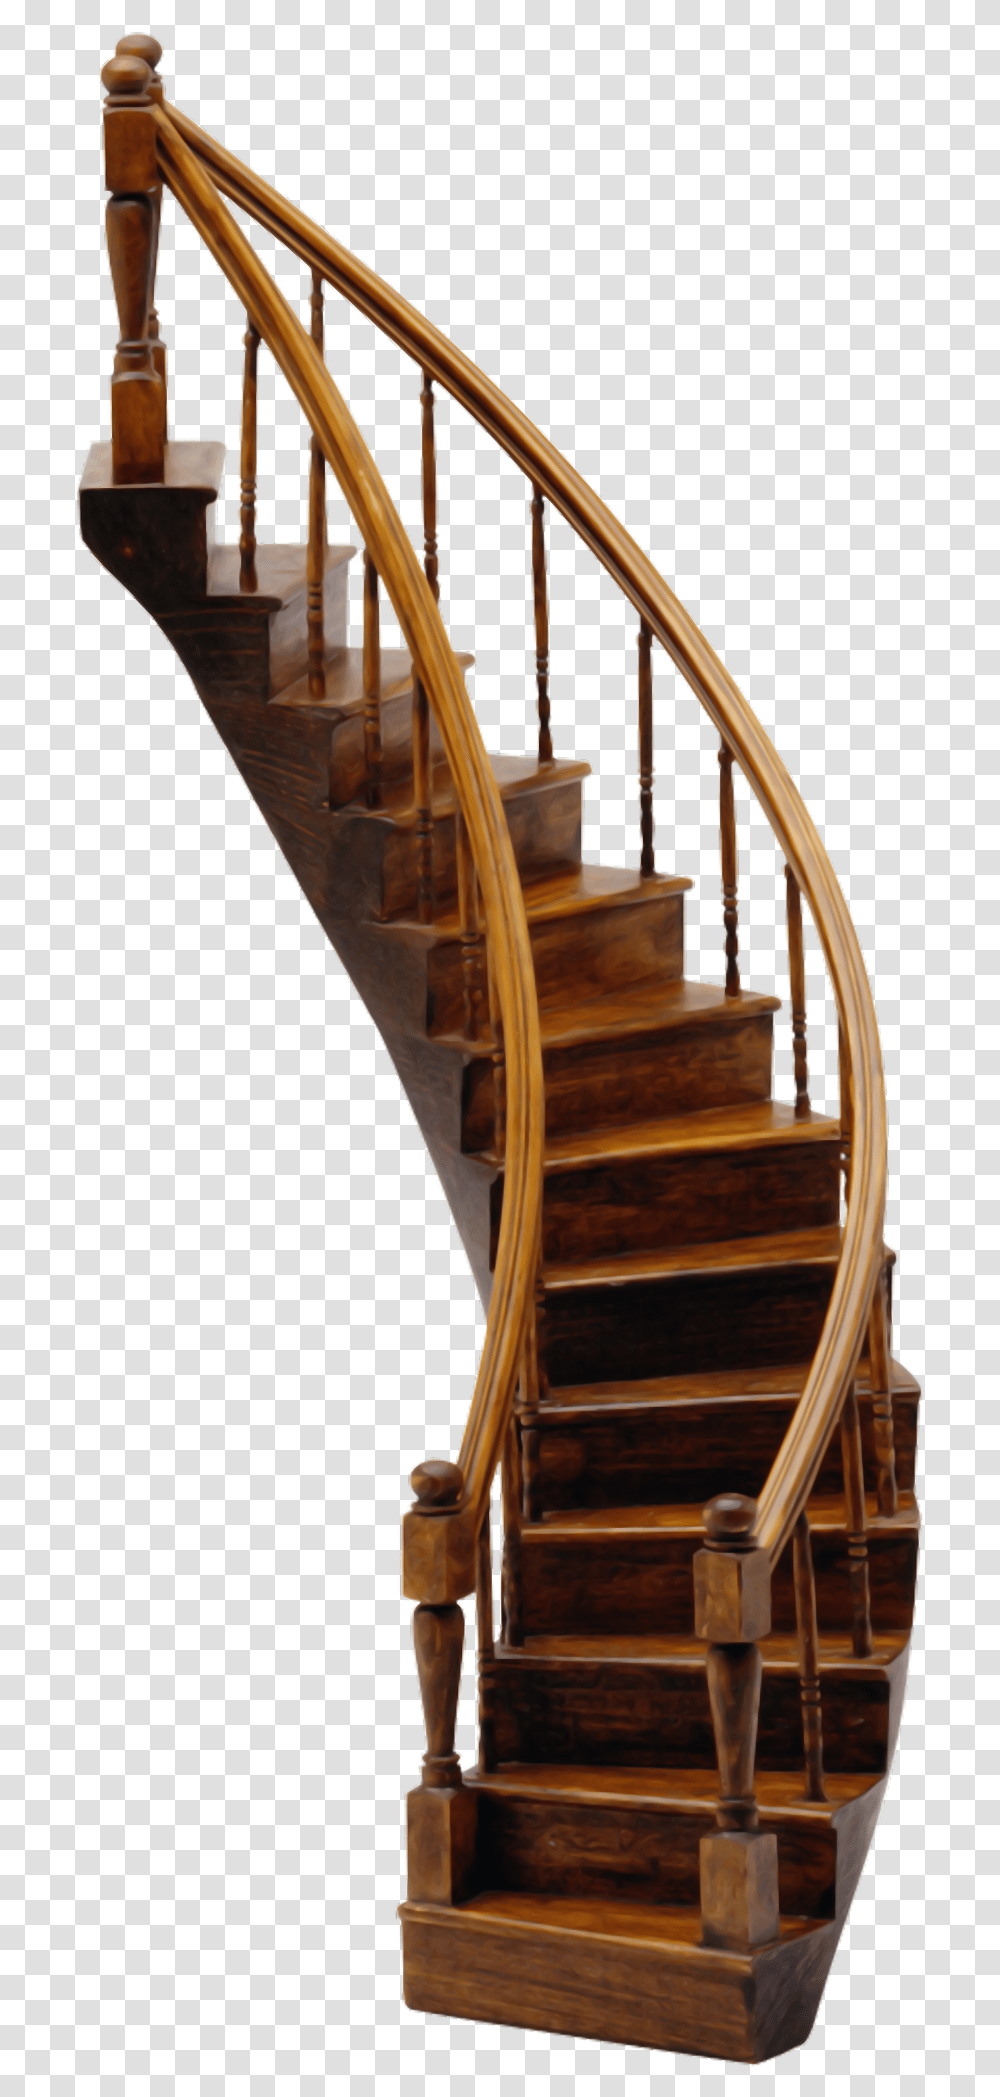 Staircase Free Download Stairs, Handrail, Banister, Wood, Railing Transparent Png